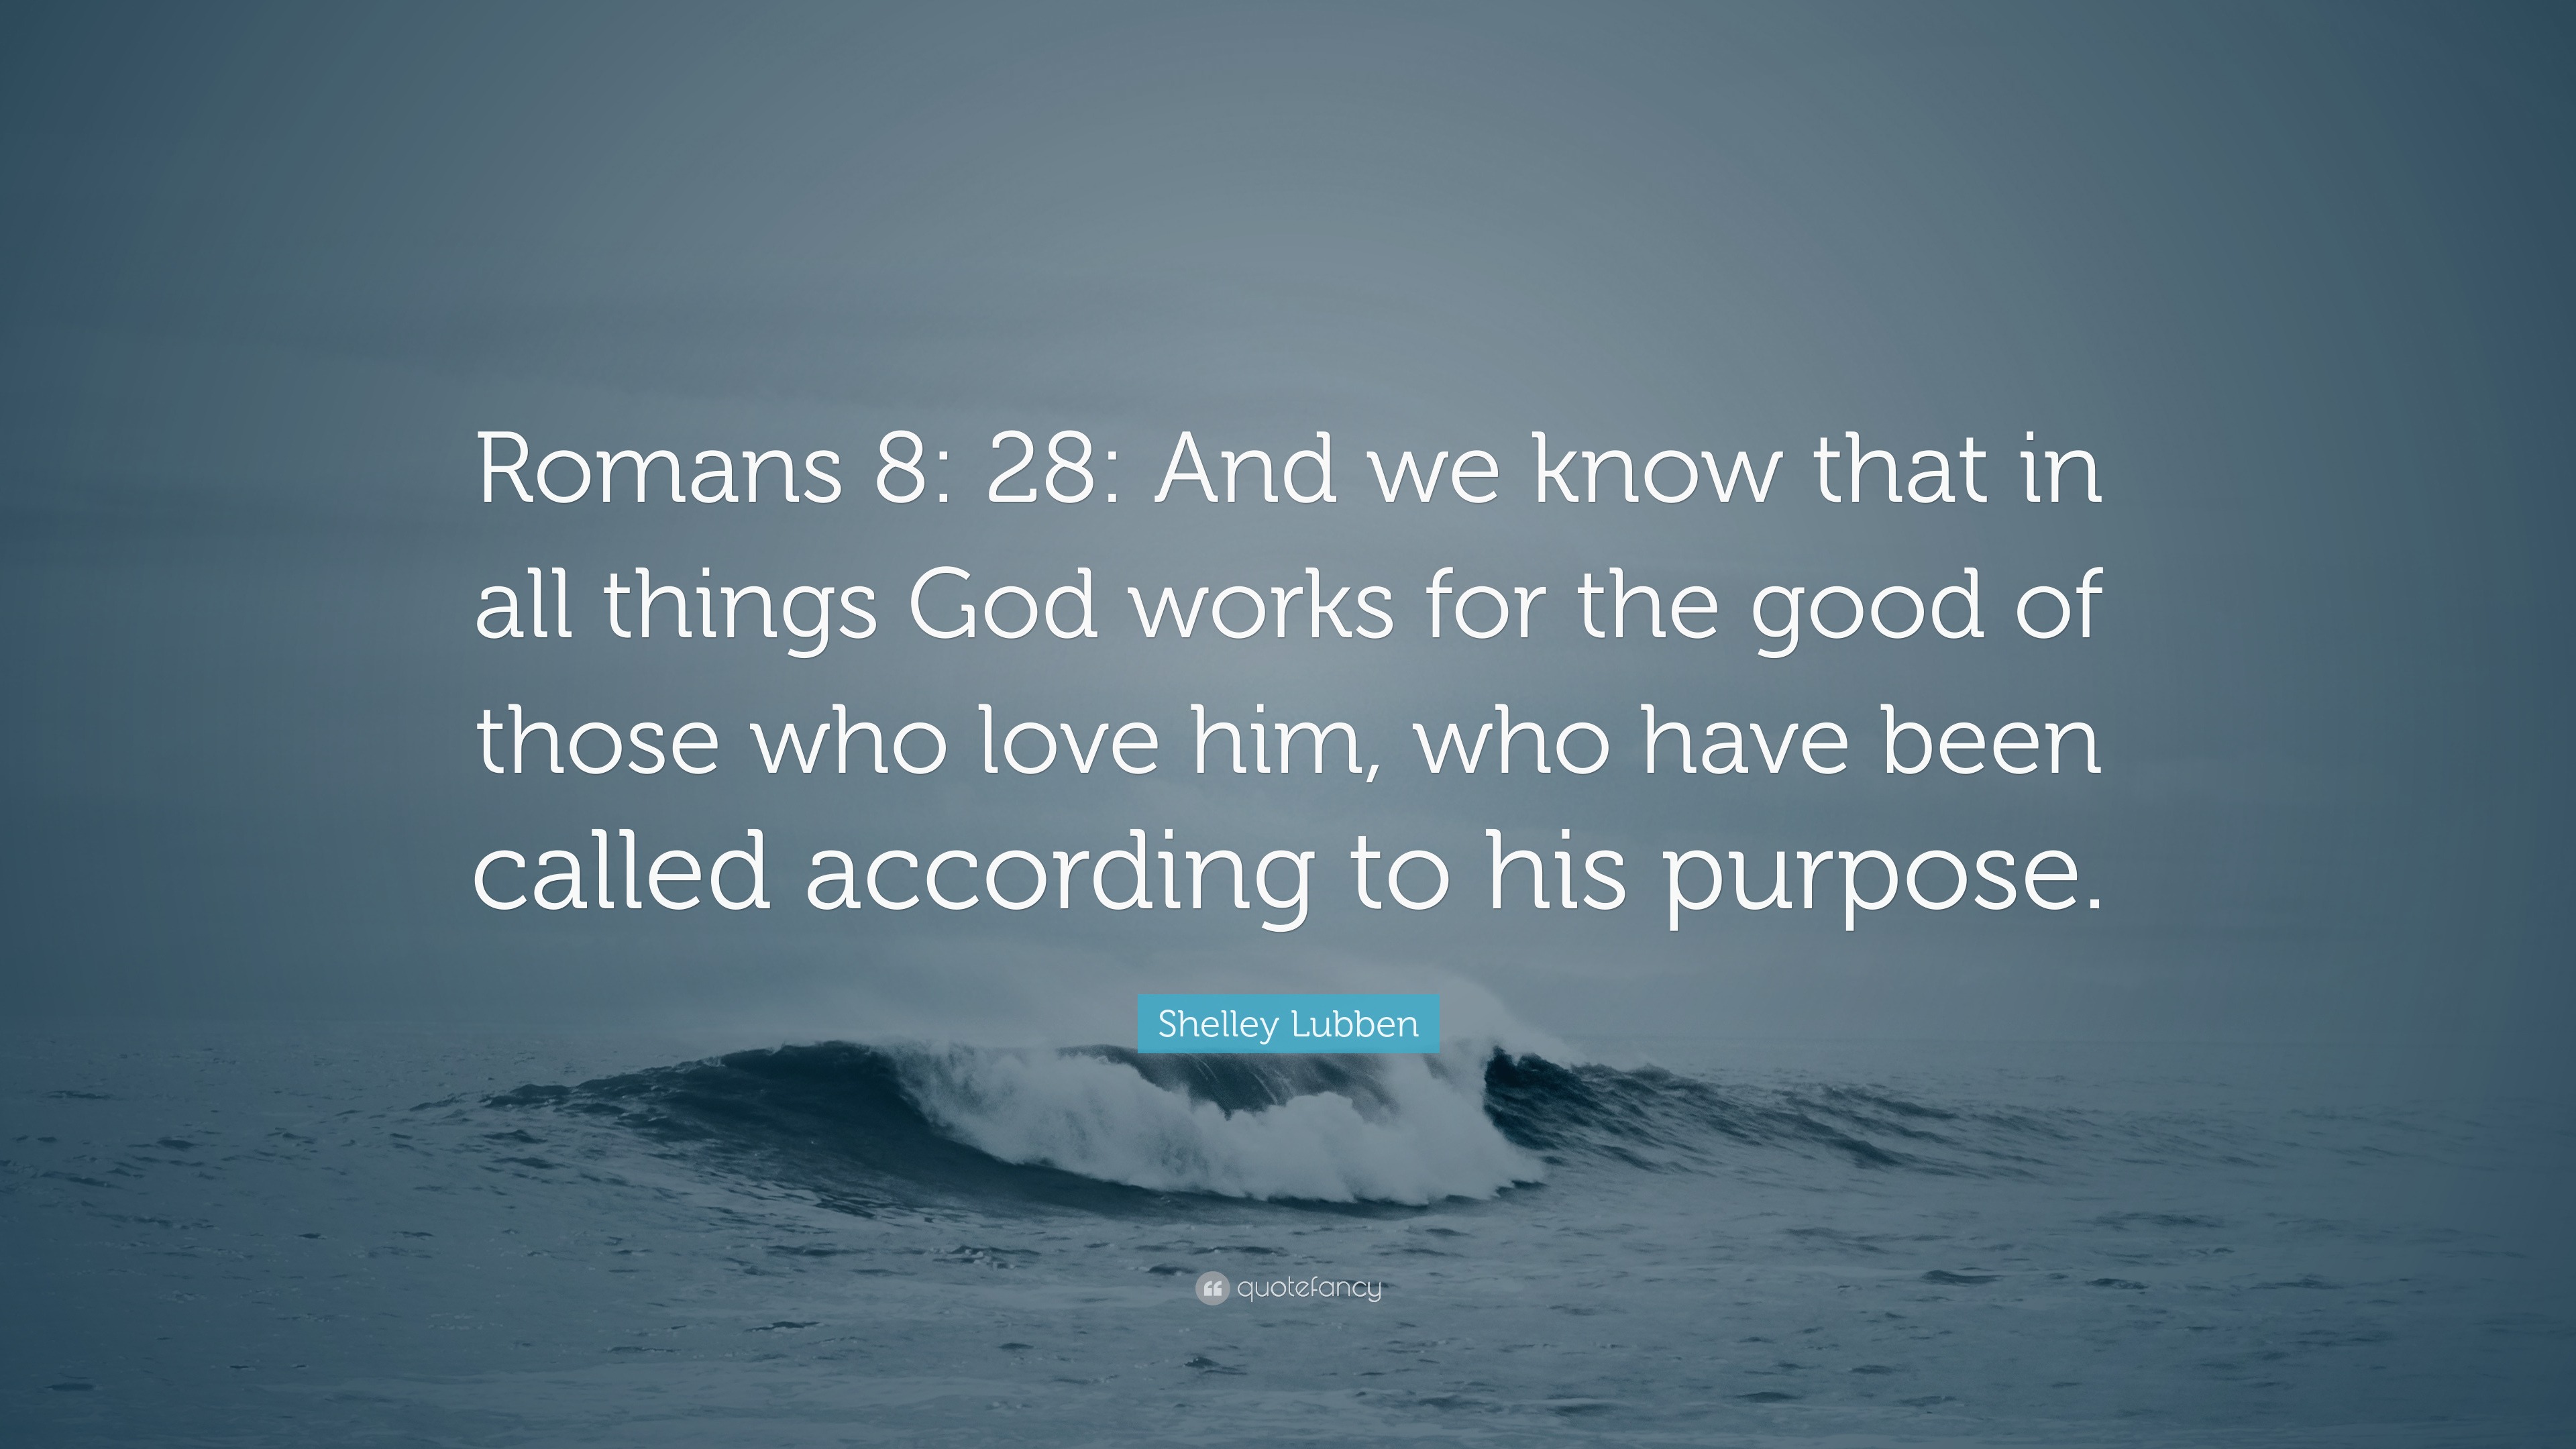 Shelley Lubben Quote: “Romans 8: 28: And we know that in all things God  works for the good of those who love him, who have been called accordin...”